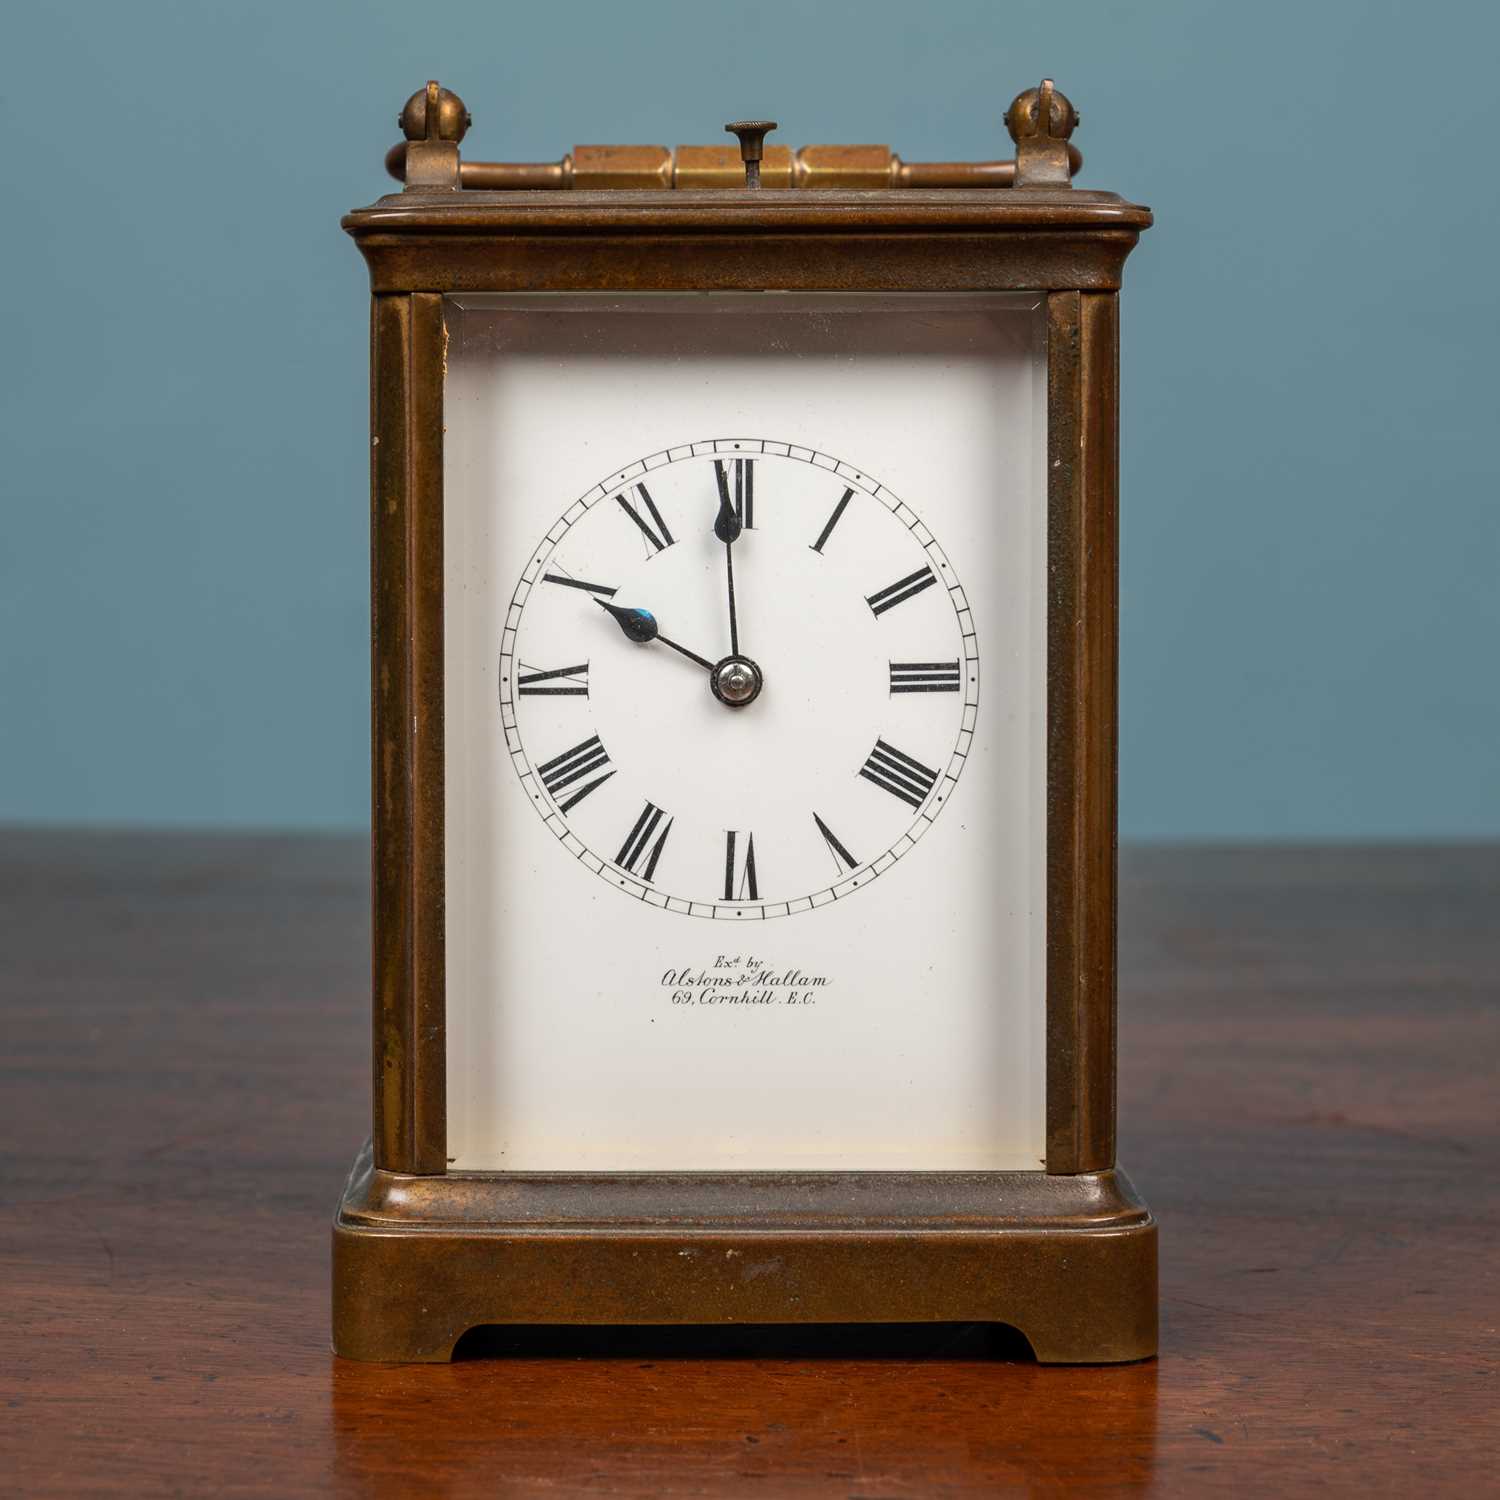 Lot 58 - A brass carriage clock signed 'Alstons & Mallam'